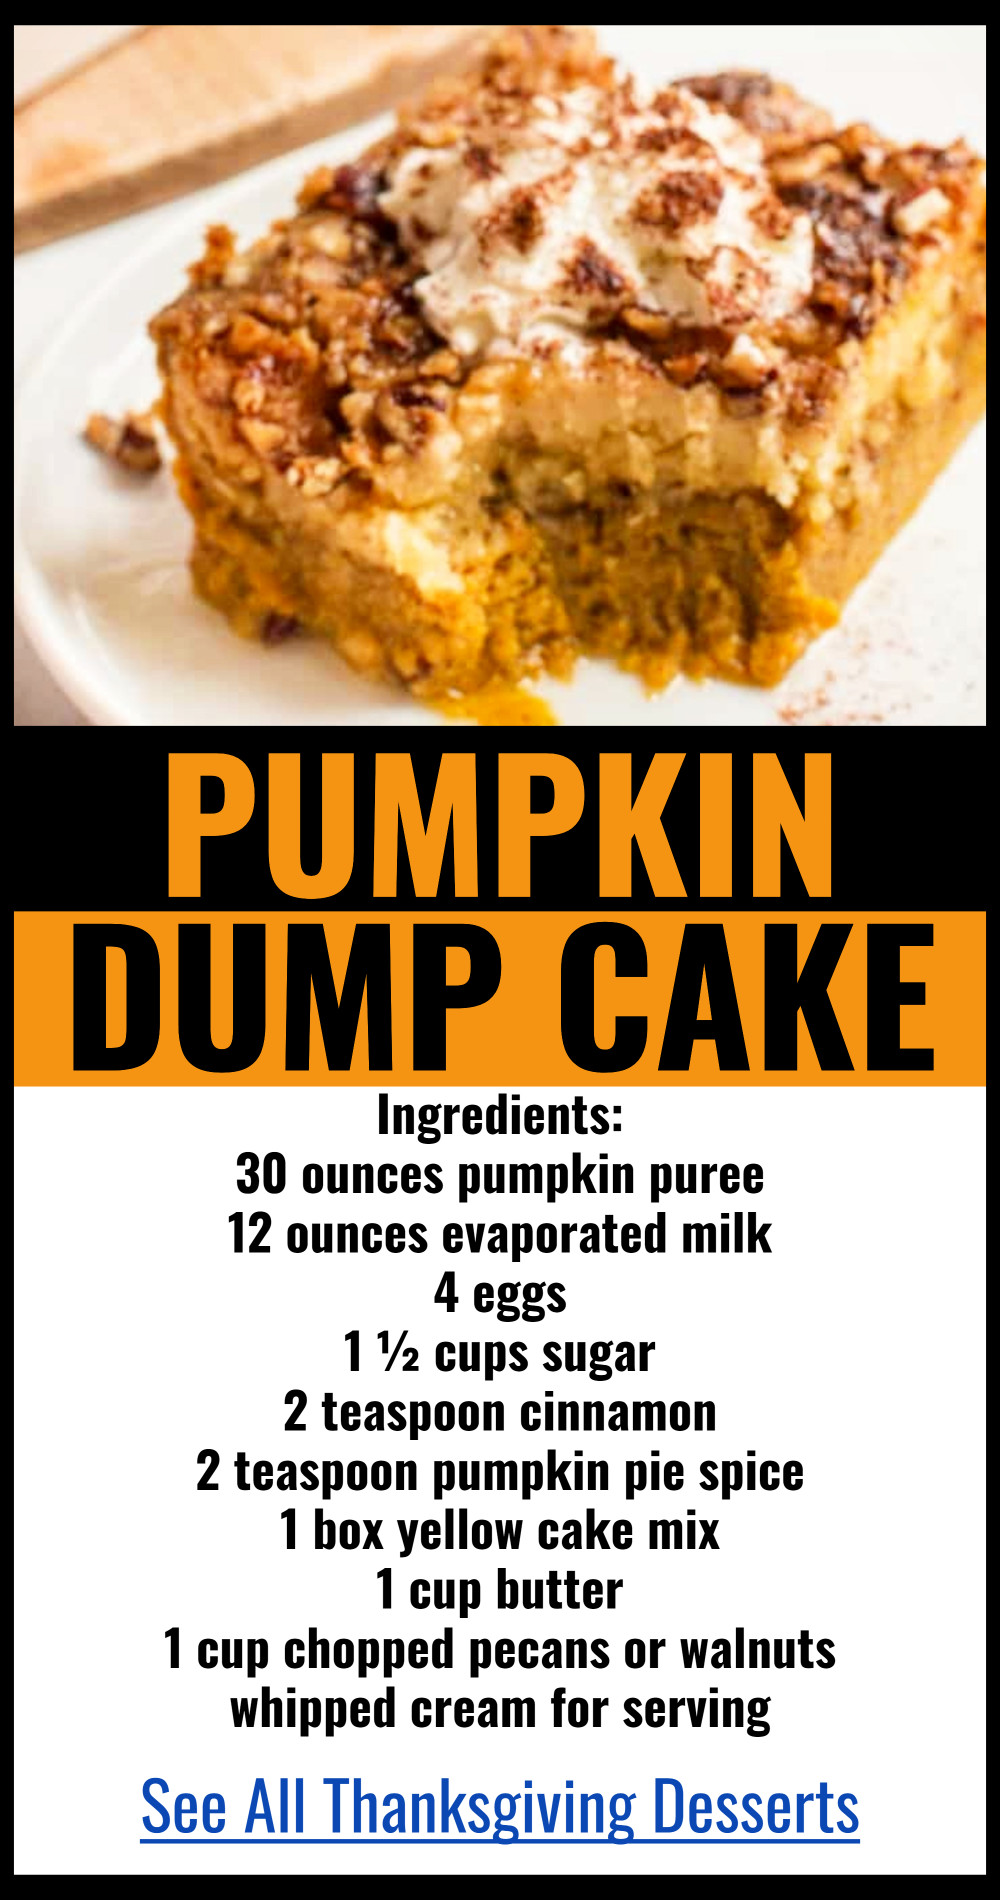 Thanksgiving desserts for a crowd - unique and creative NON-traditional Thanksgiving dessert ideas - pumpkin dump cake easy one pan dessert for a potluck at work, church or large group Thanksgiving dinner - easy to make ahead too